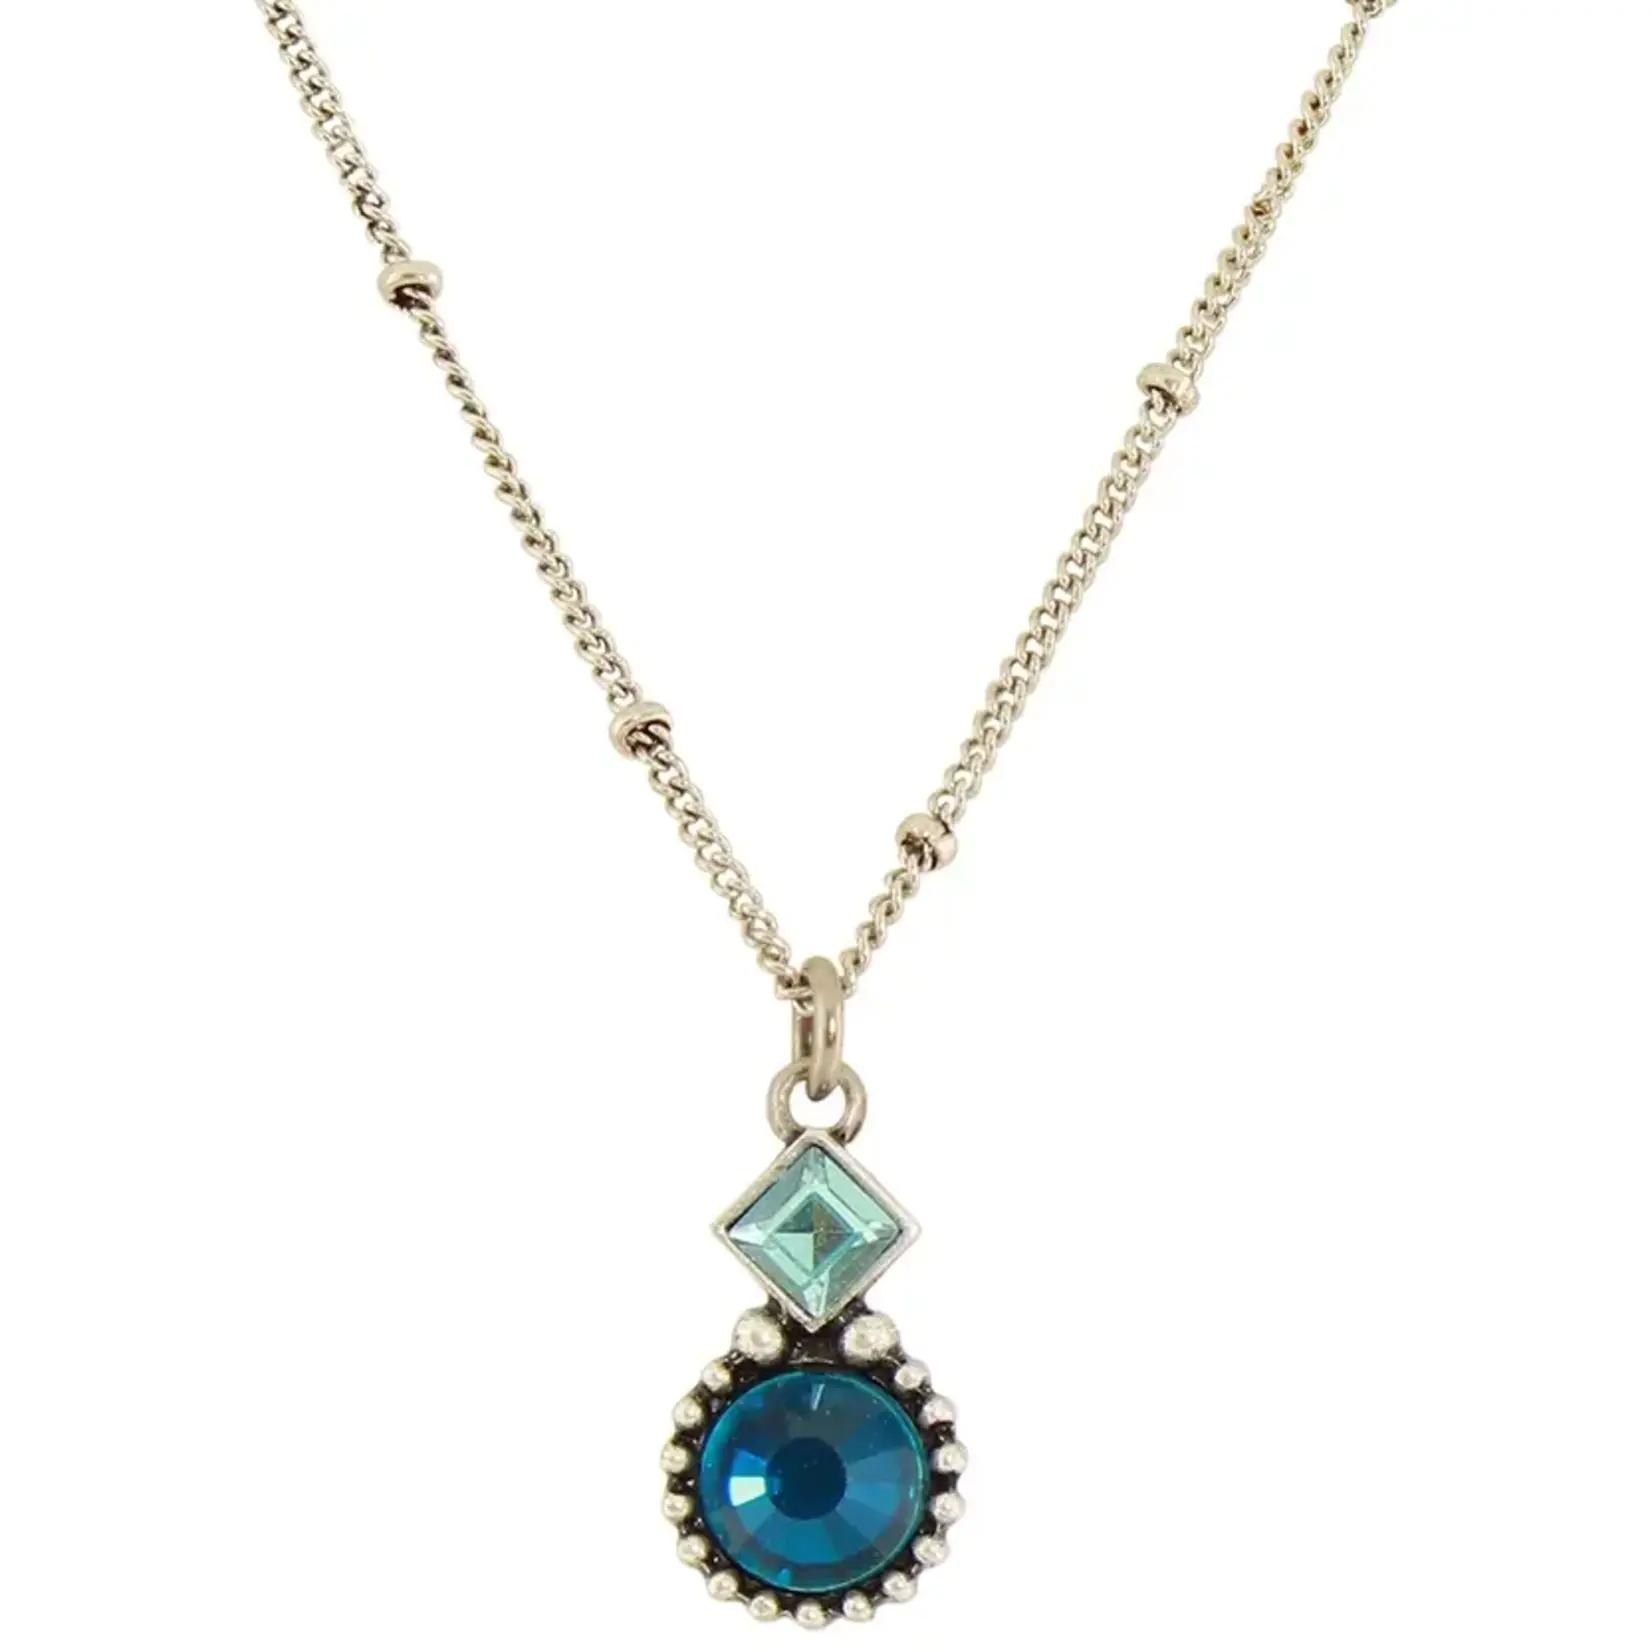 Stacked Granulated Crystal Necklace - Zircon Blue [N1230D]